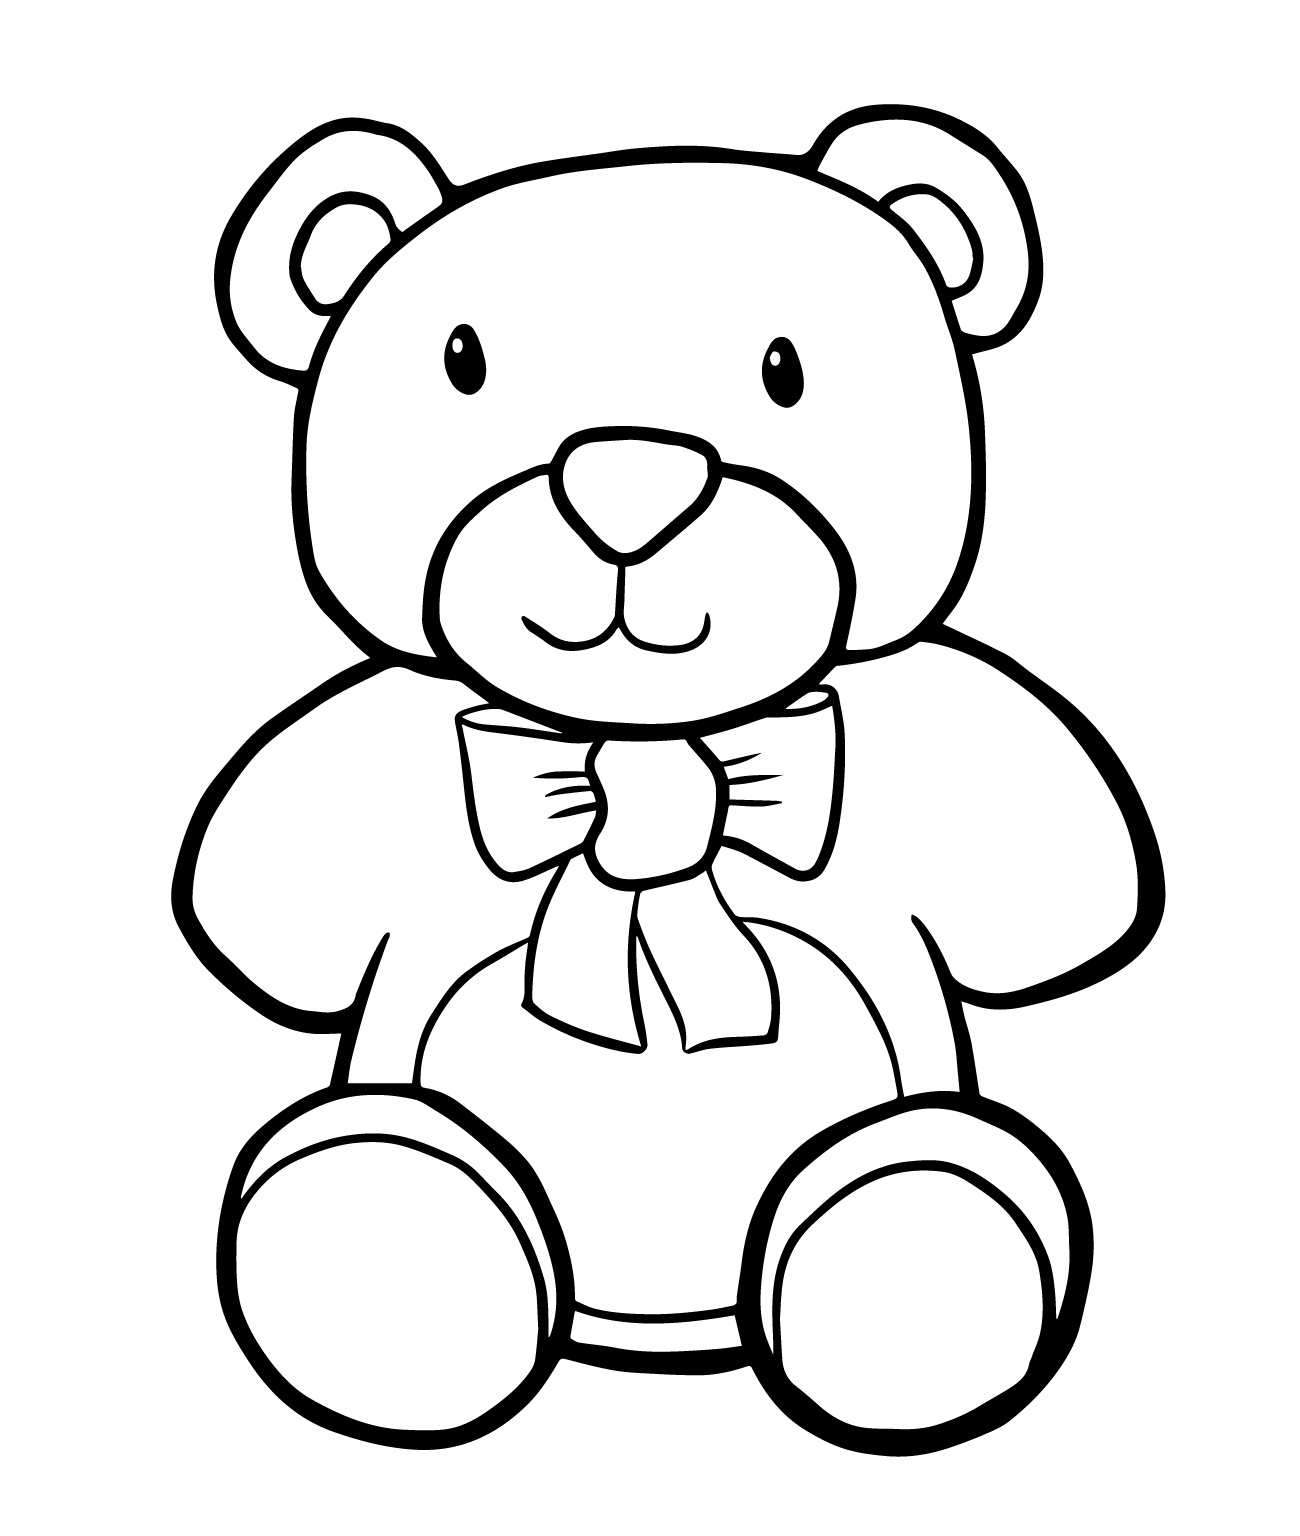 Teddy Bear with balloon sketch fill machine embroidery design file by The  Classic Applique